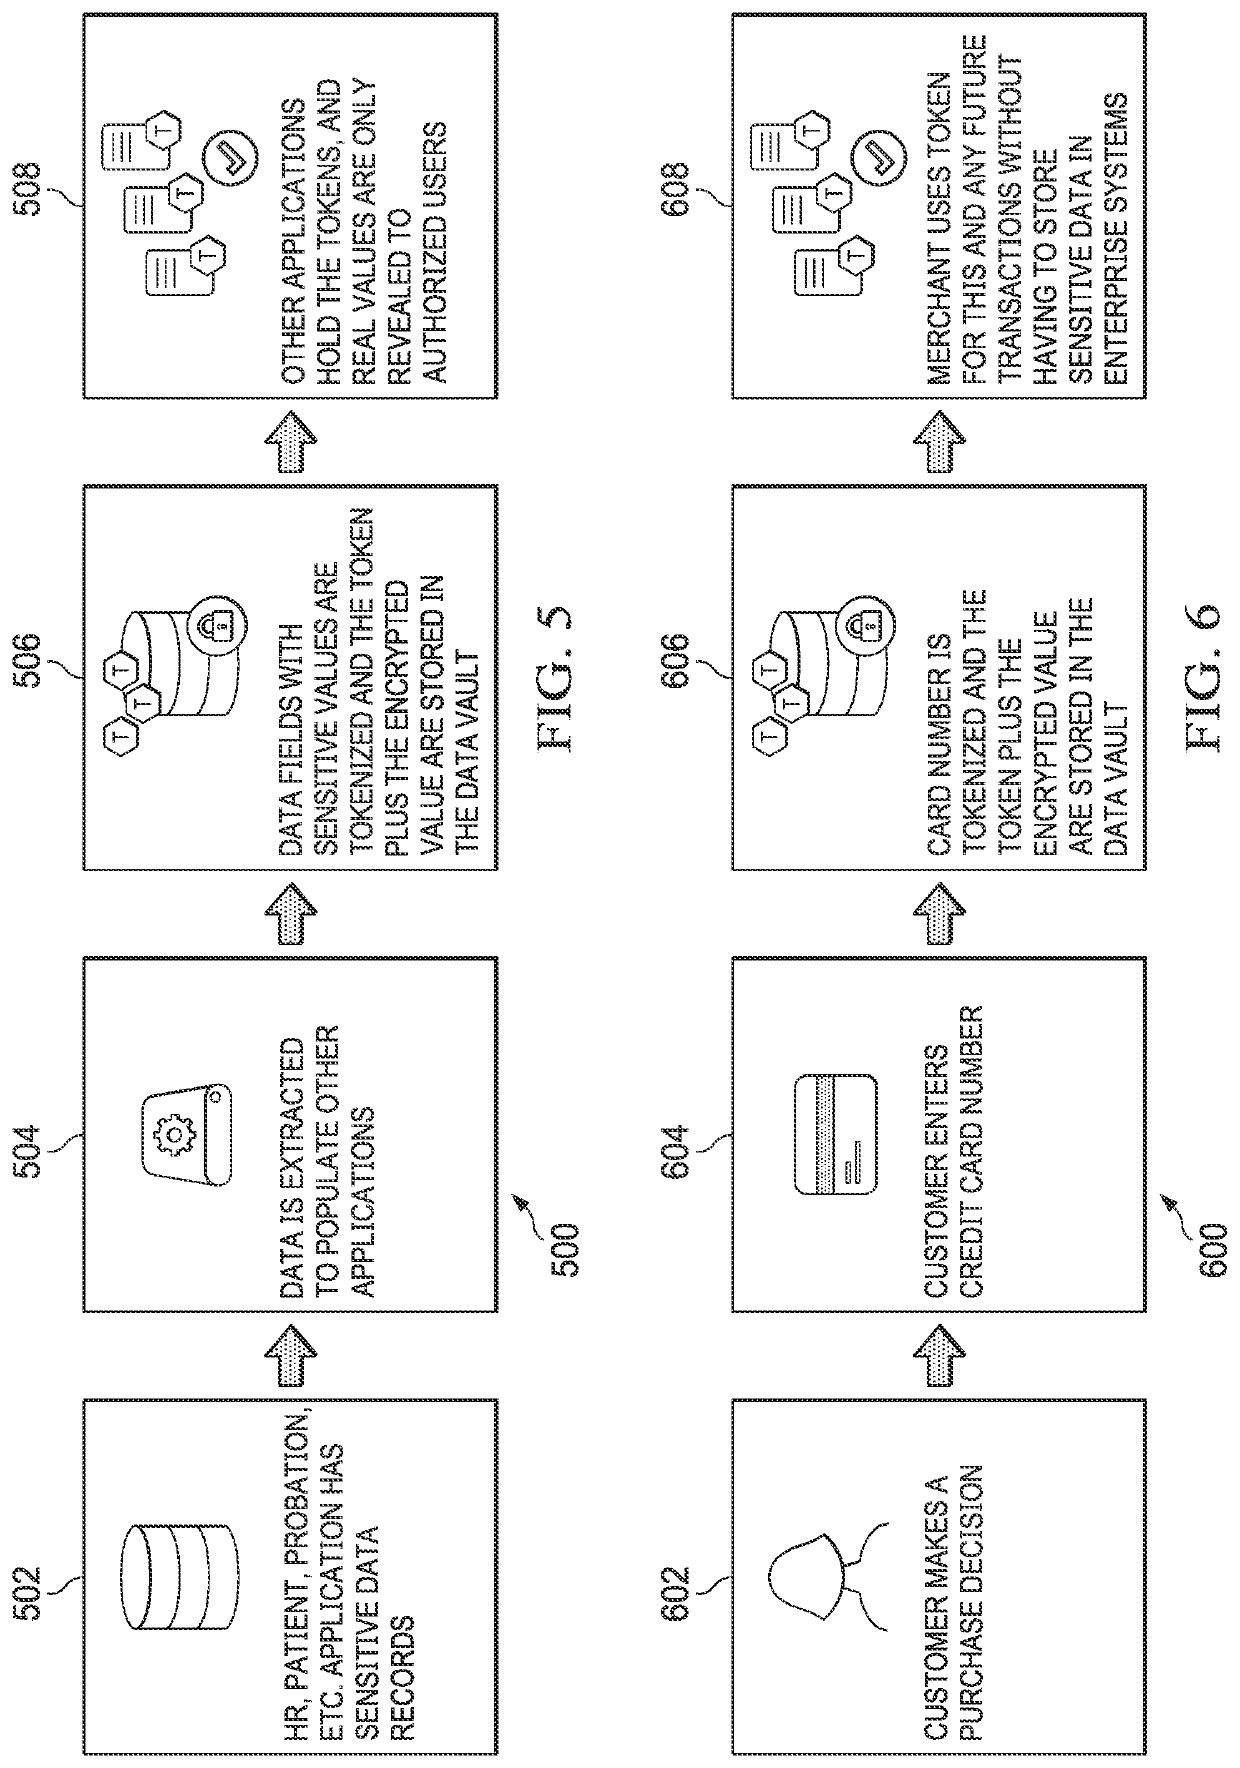 Token-based data security systems and methods with cross-referencing tokens in freeform text within structured document